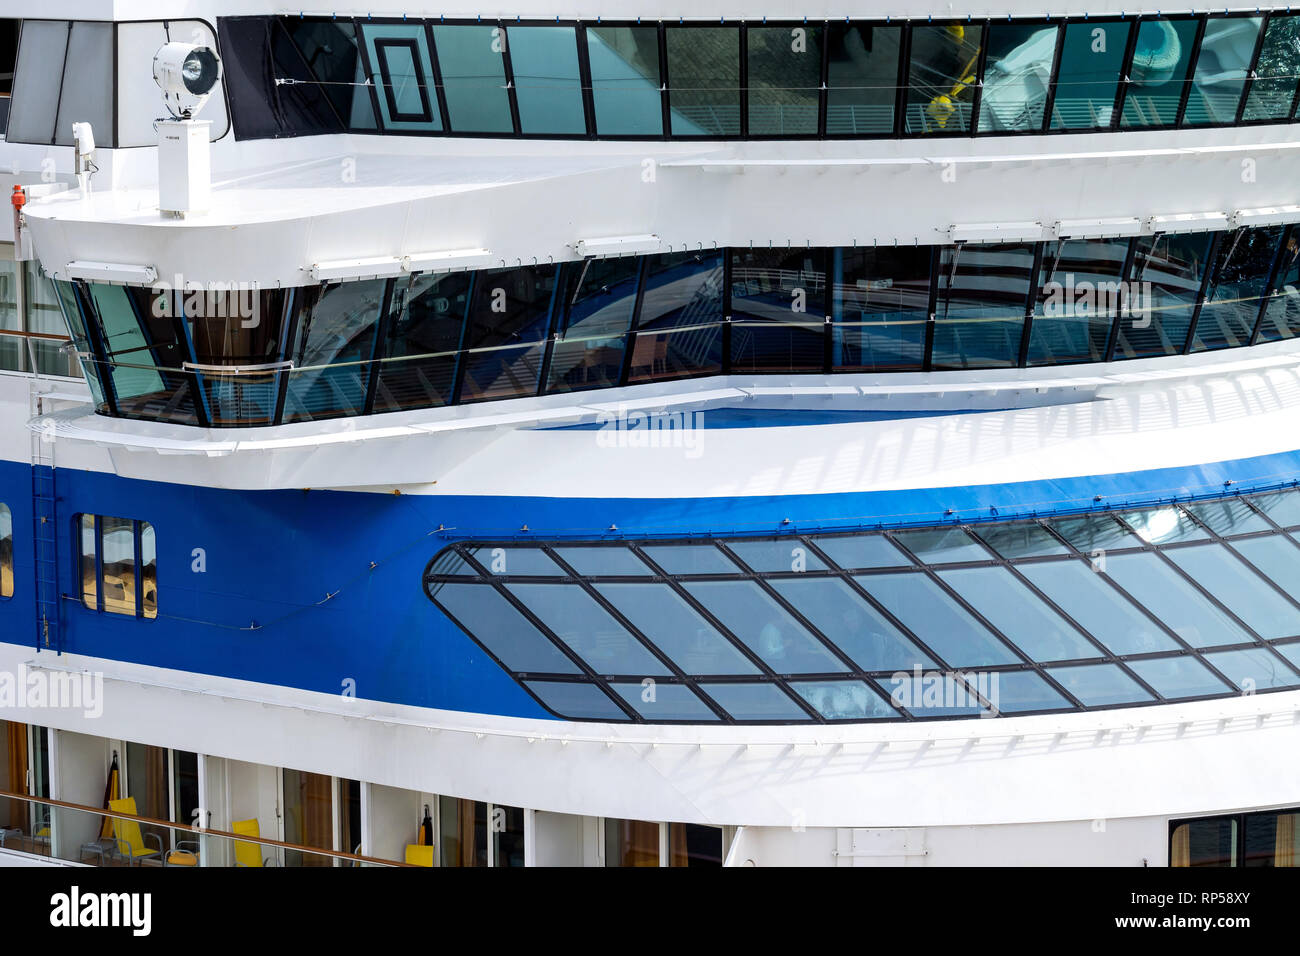 Bridge of AIDAluna. AIDAluna is a Sphinx class cruise ship, built at Meyer Werft for AIDA Cruises, one of ten brands owned by Carnival Corp. Stock Photo